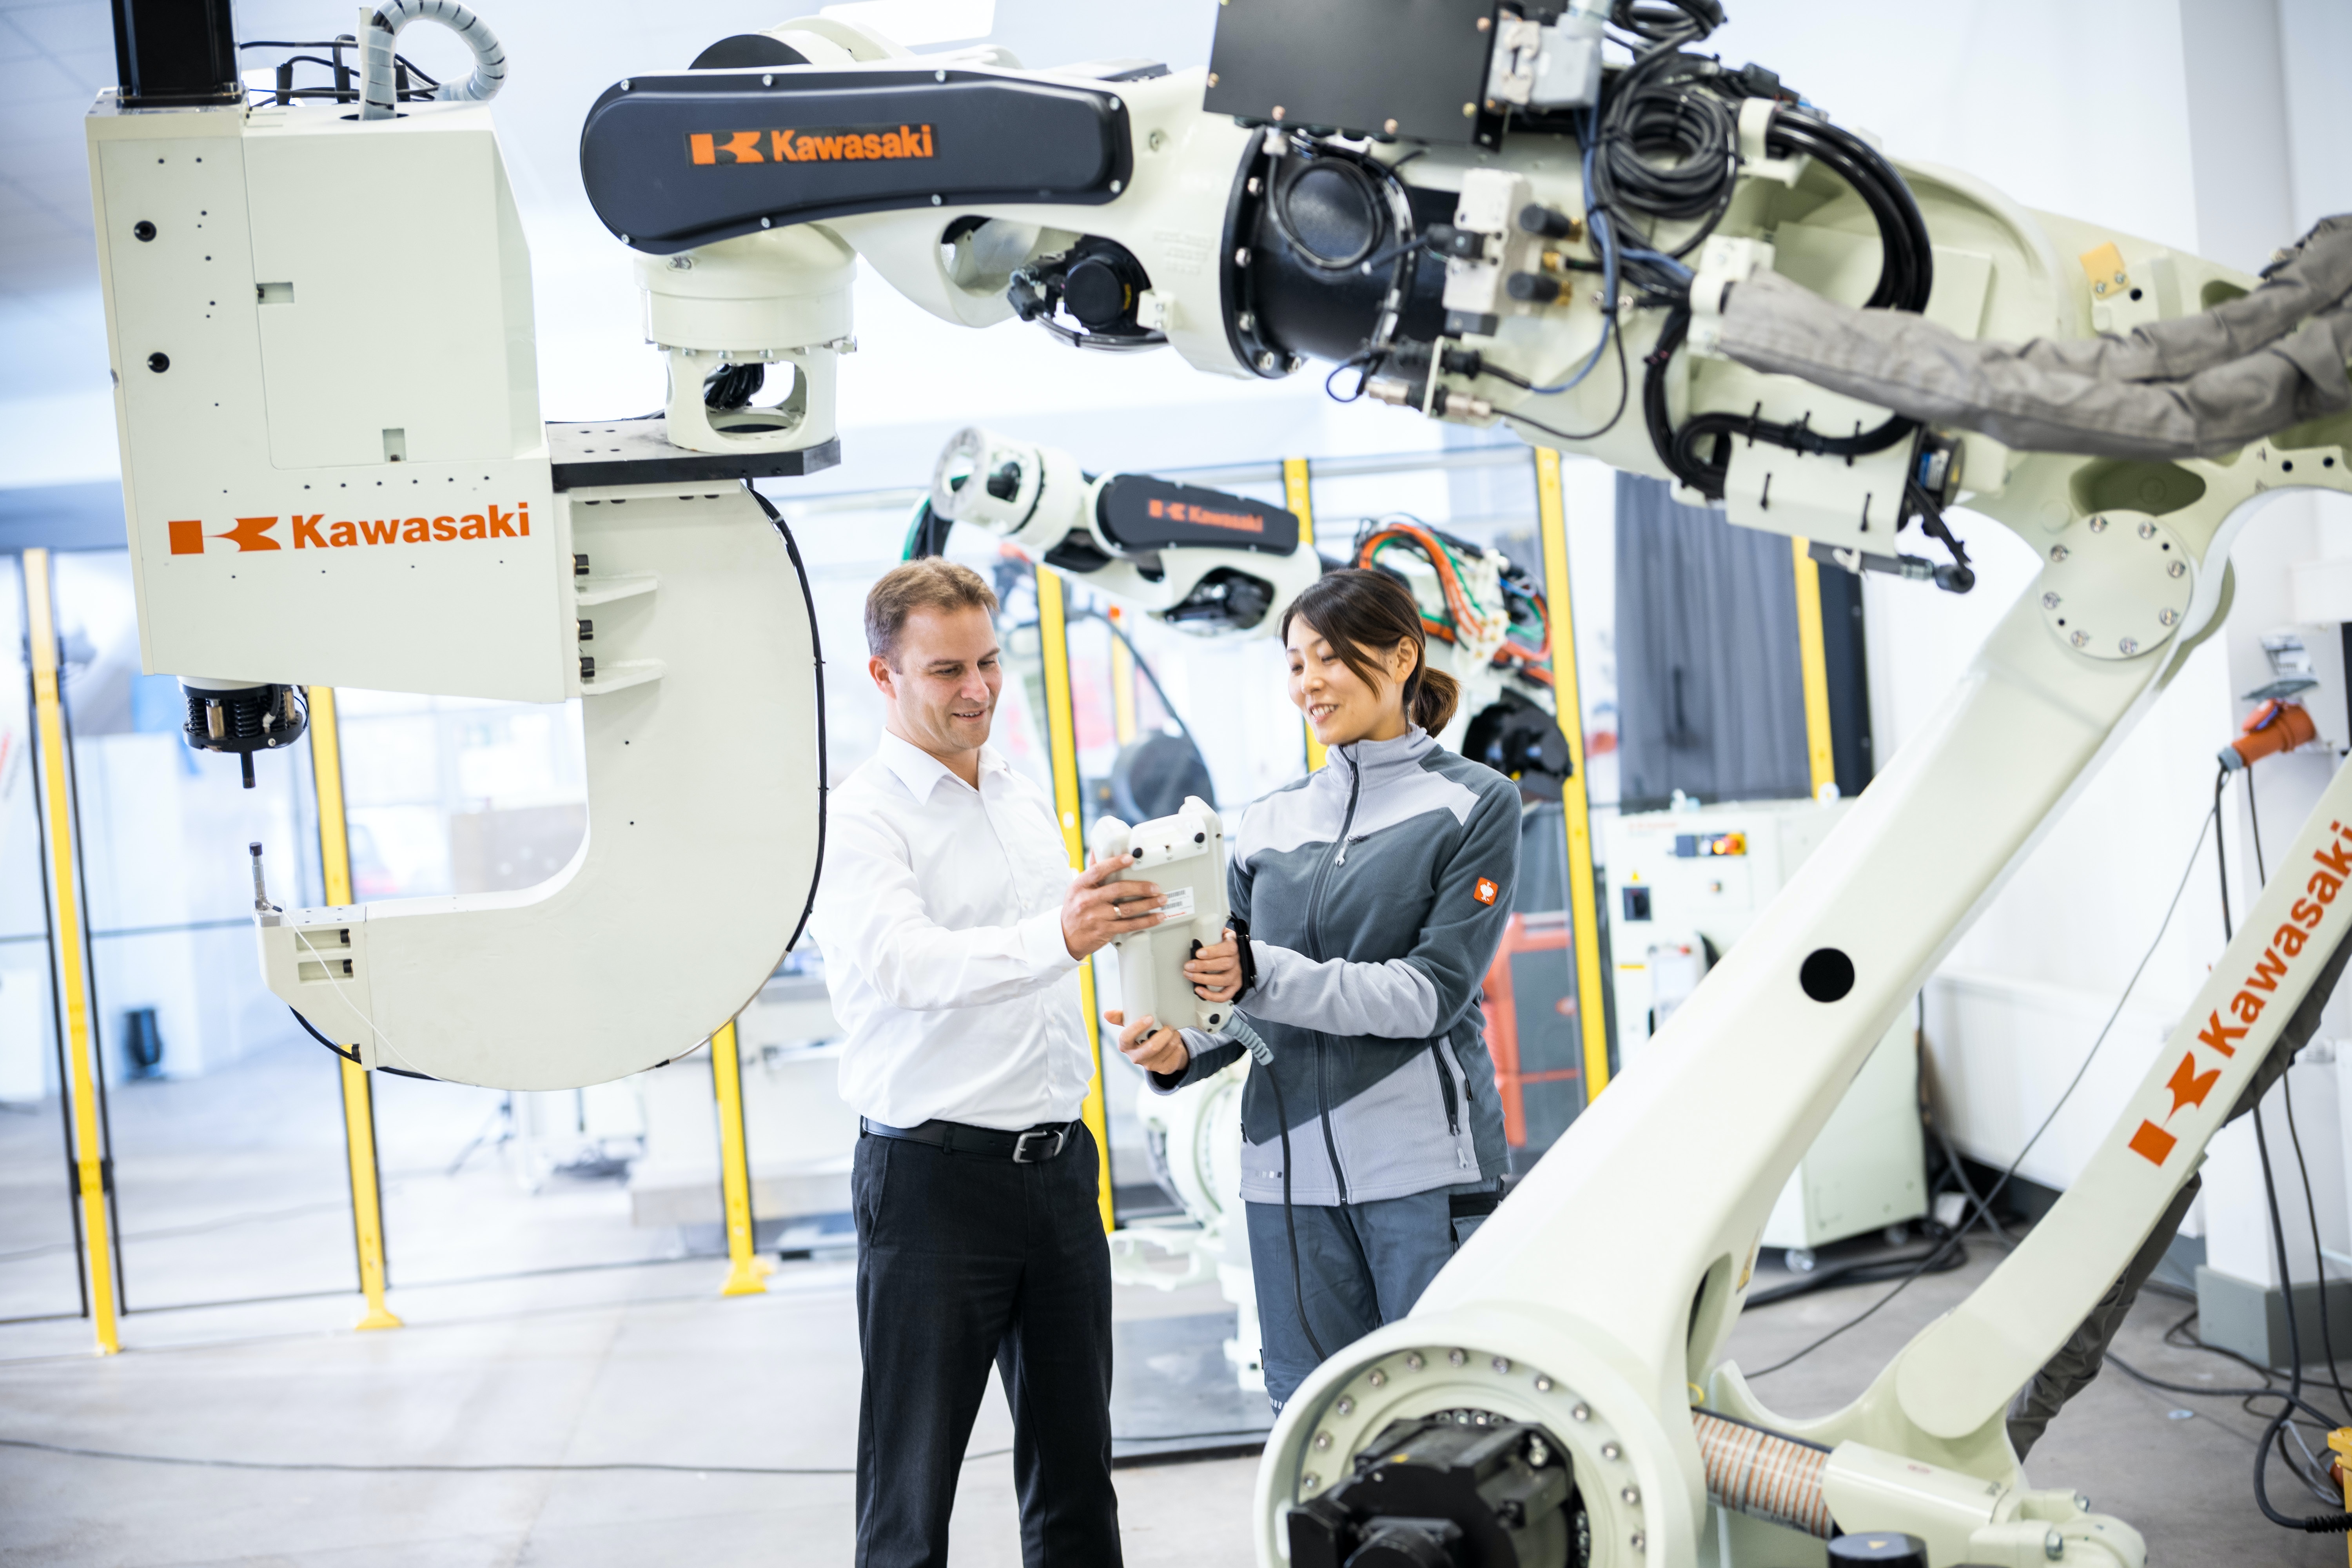 Are There Apprenticeships in the Field of Robotics and Automation?